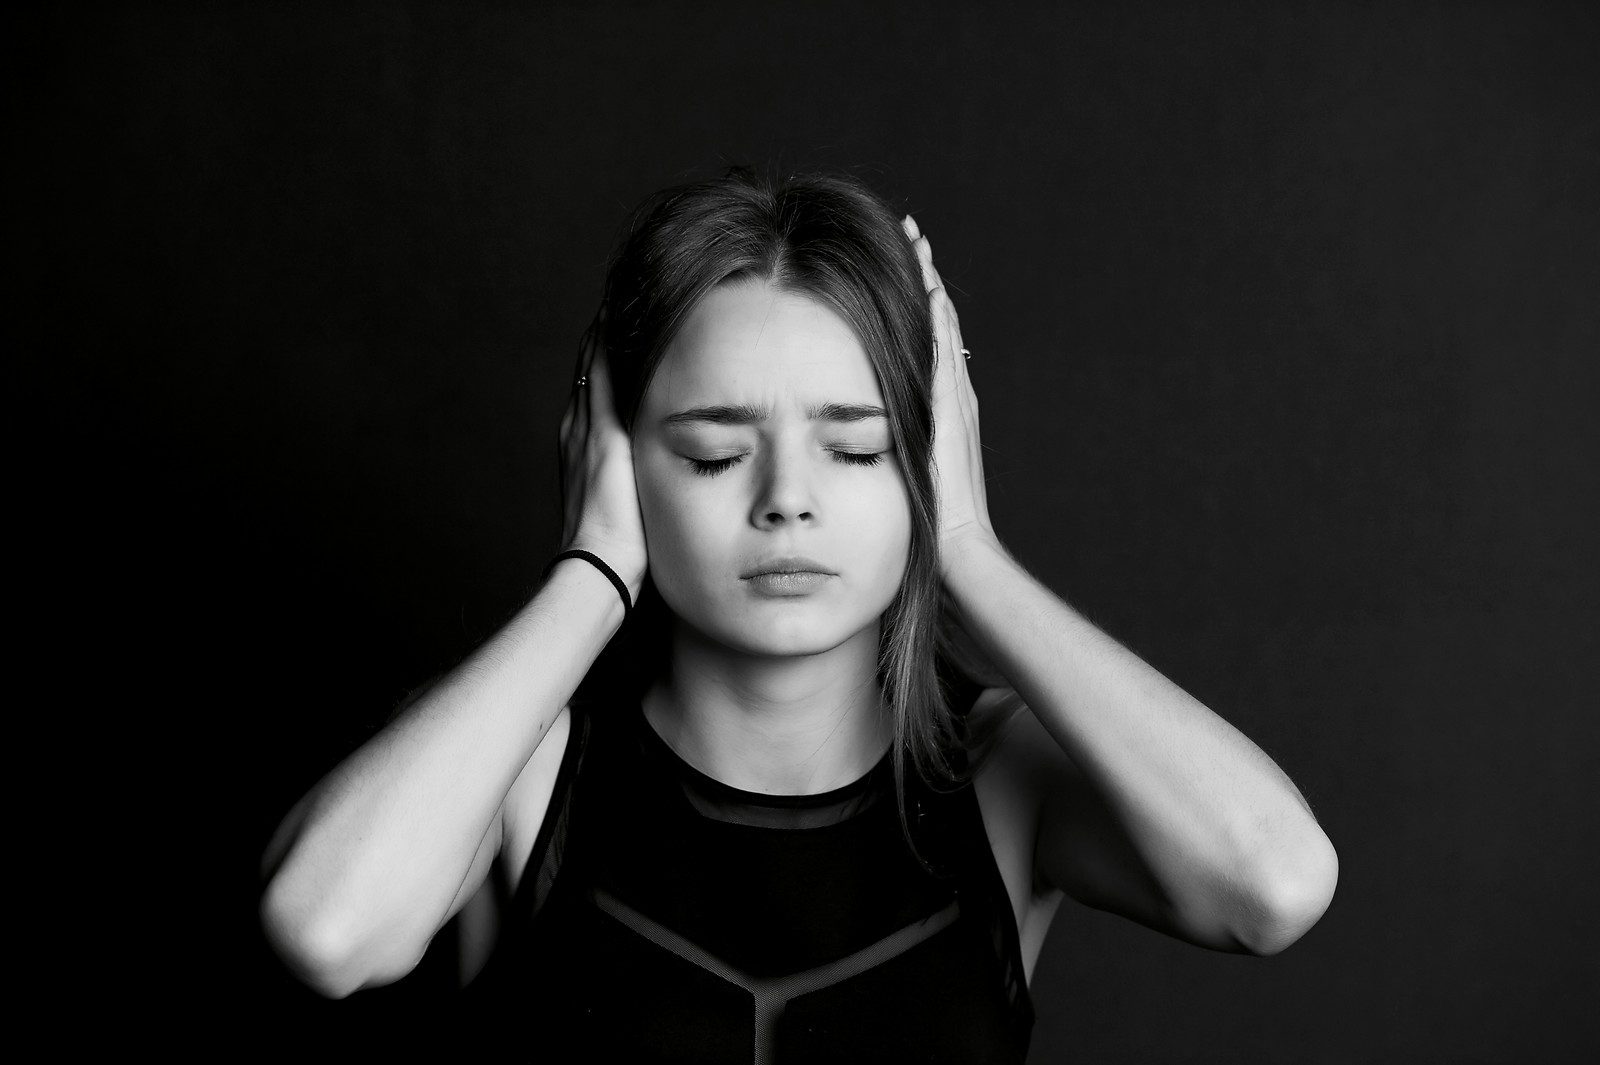 Black and white image of young teen girl closing her eyes and covering her ears with her hands